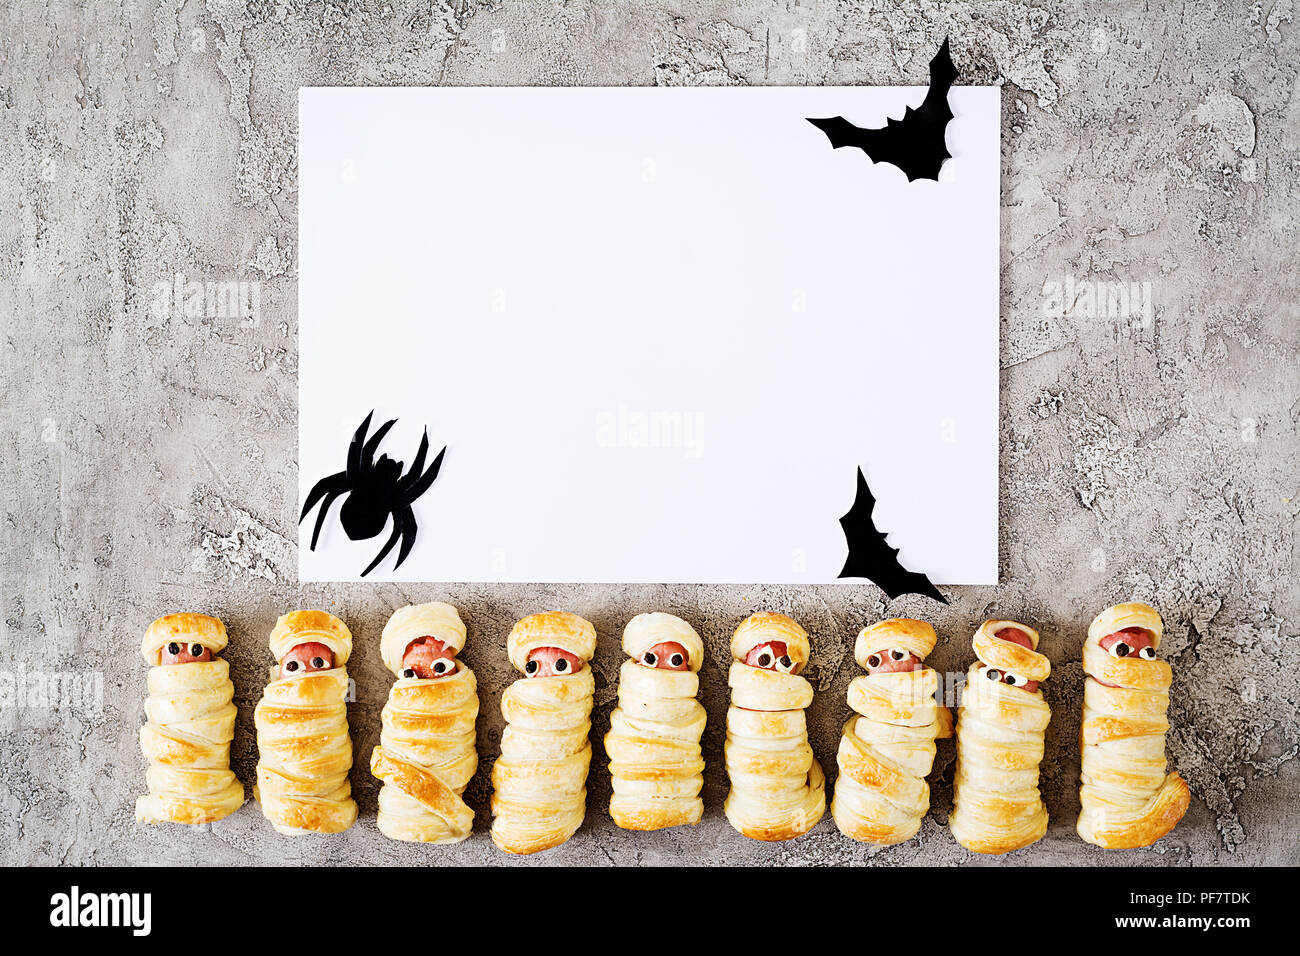 Download Scary Sausage Mummies In Dough With Funny Eyes On Table Mockup Decoration Halloween Food Top View Flat Lay Stock Photo Alamy